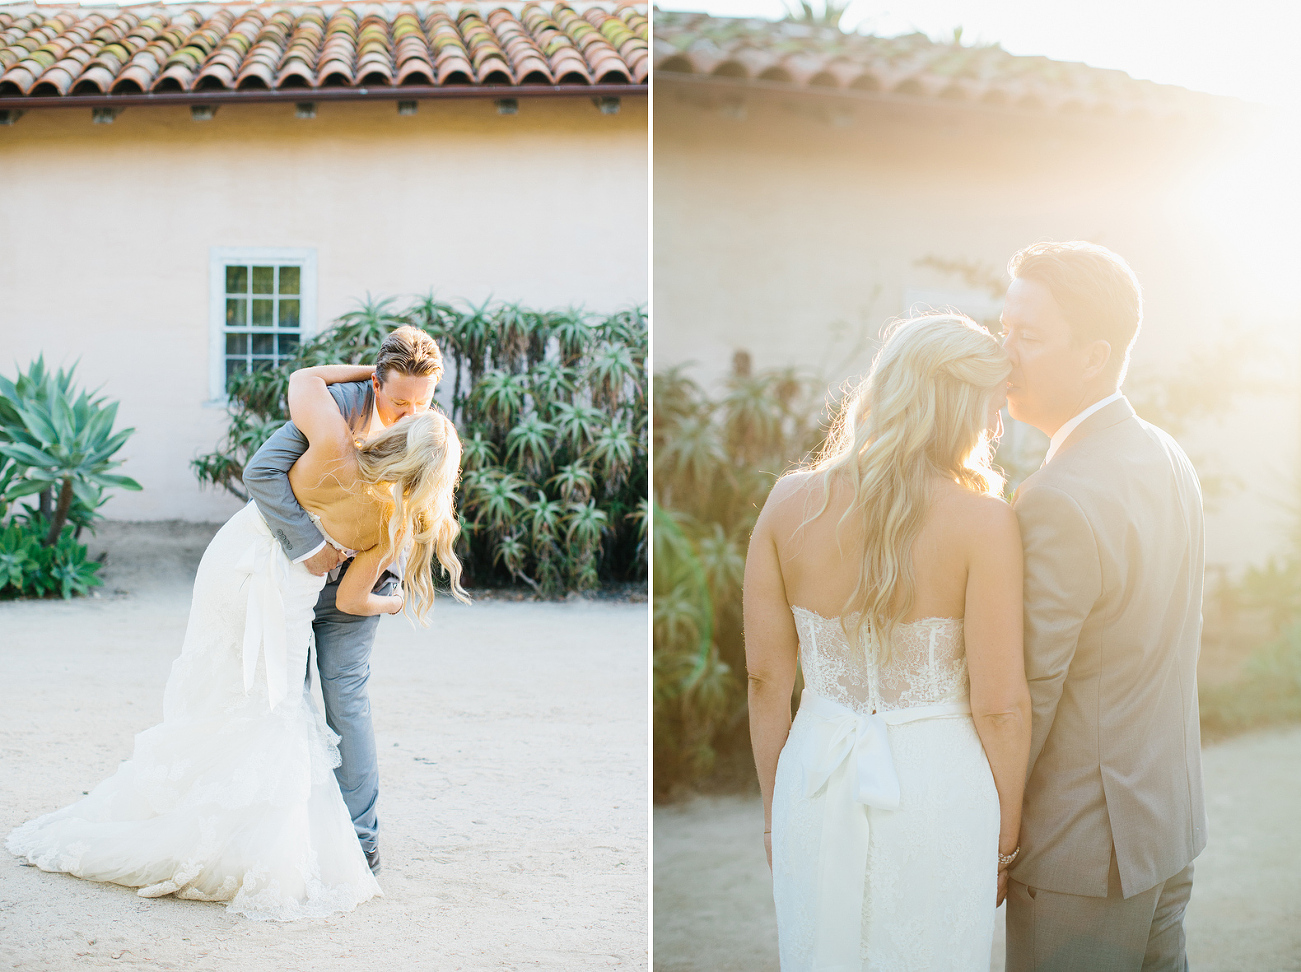 Beautiful photos of the bride and groom. 